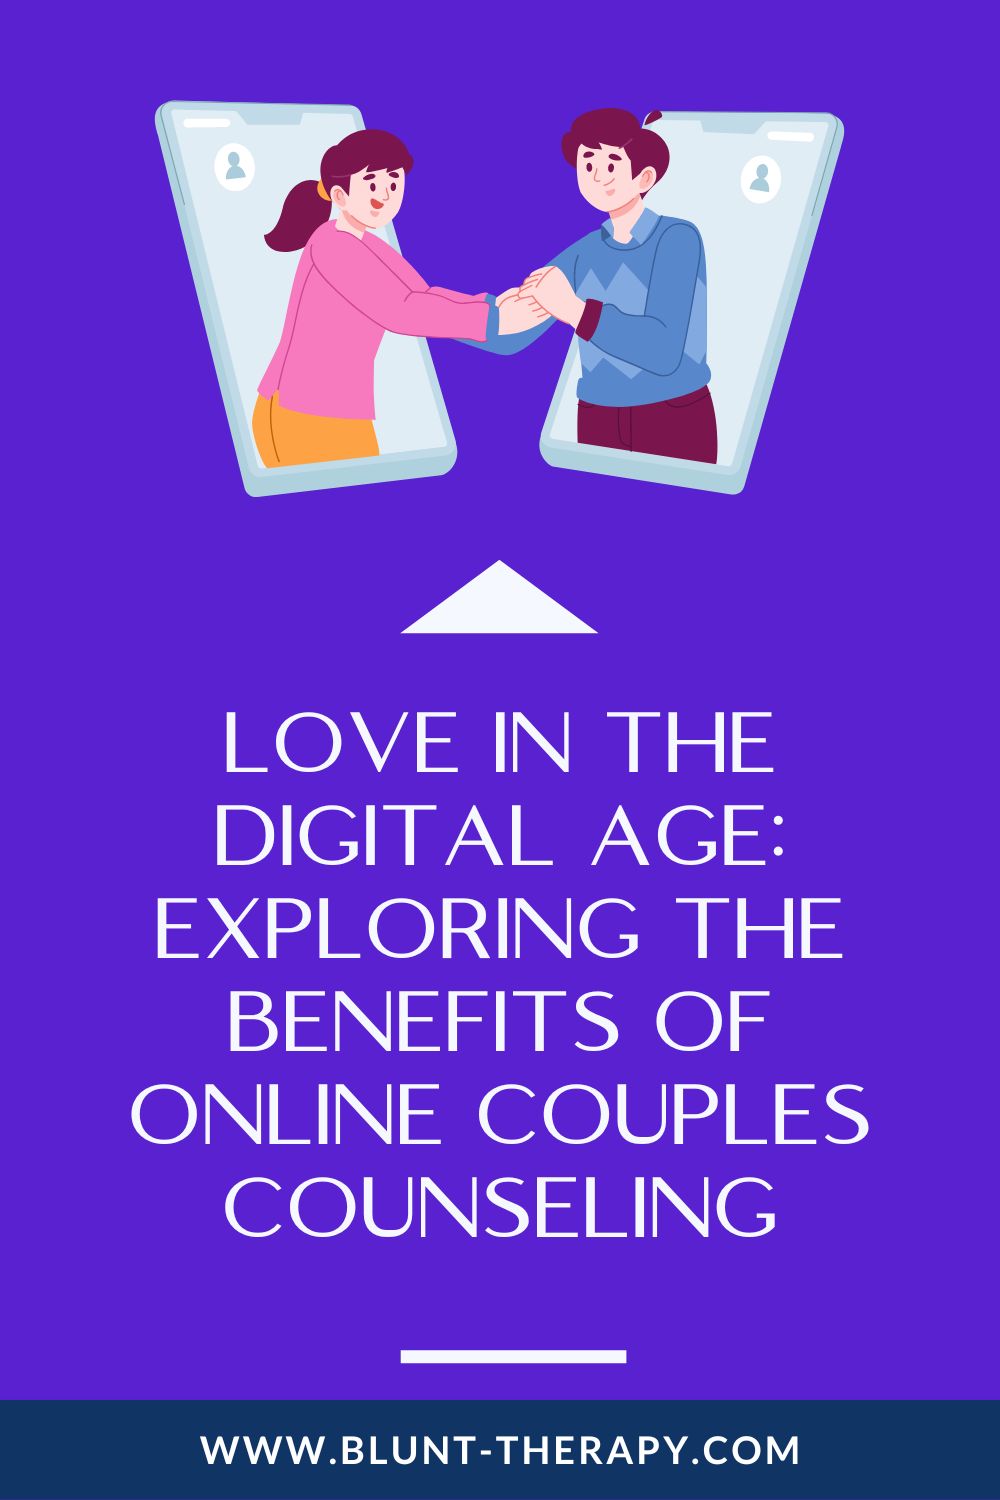 Love in the Digital Age: Exploring the Benefits of Online Couples Counseling